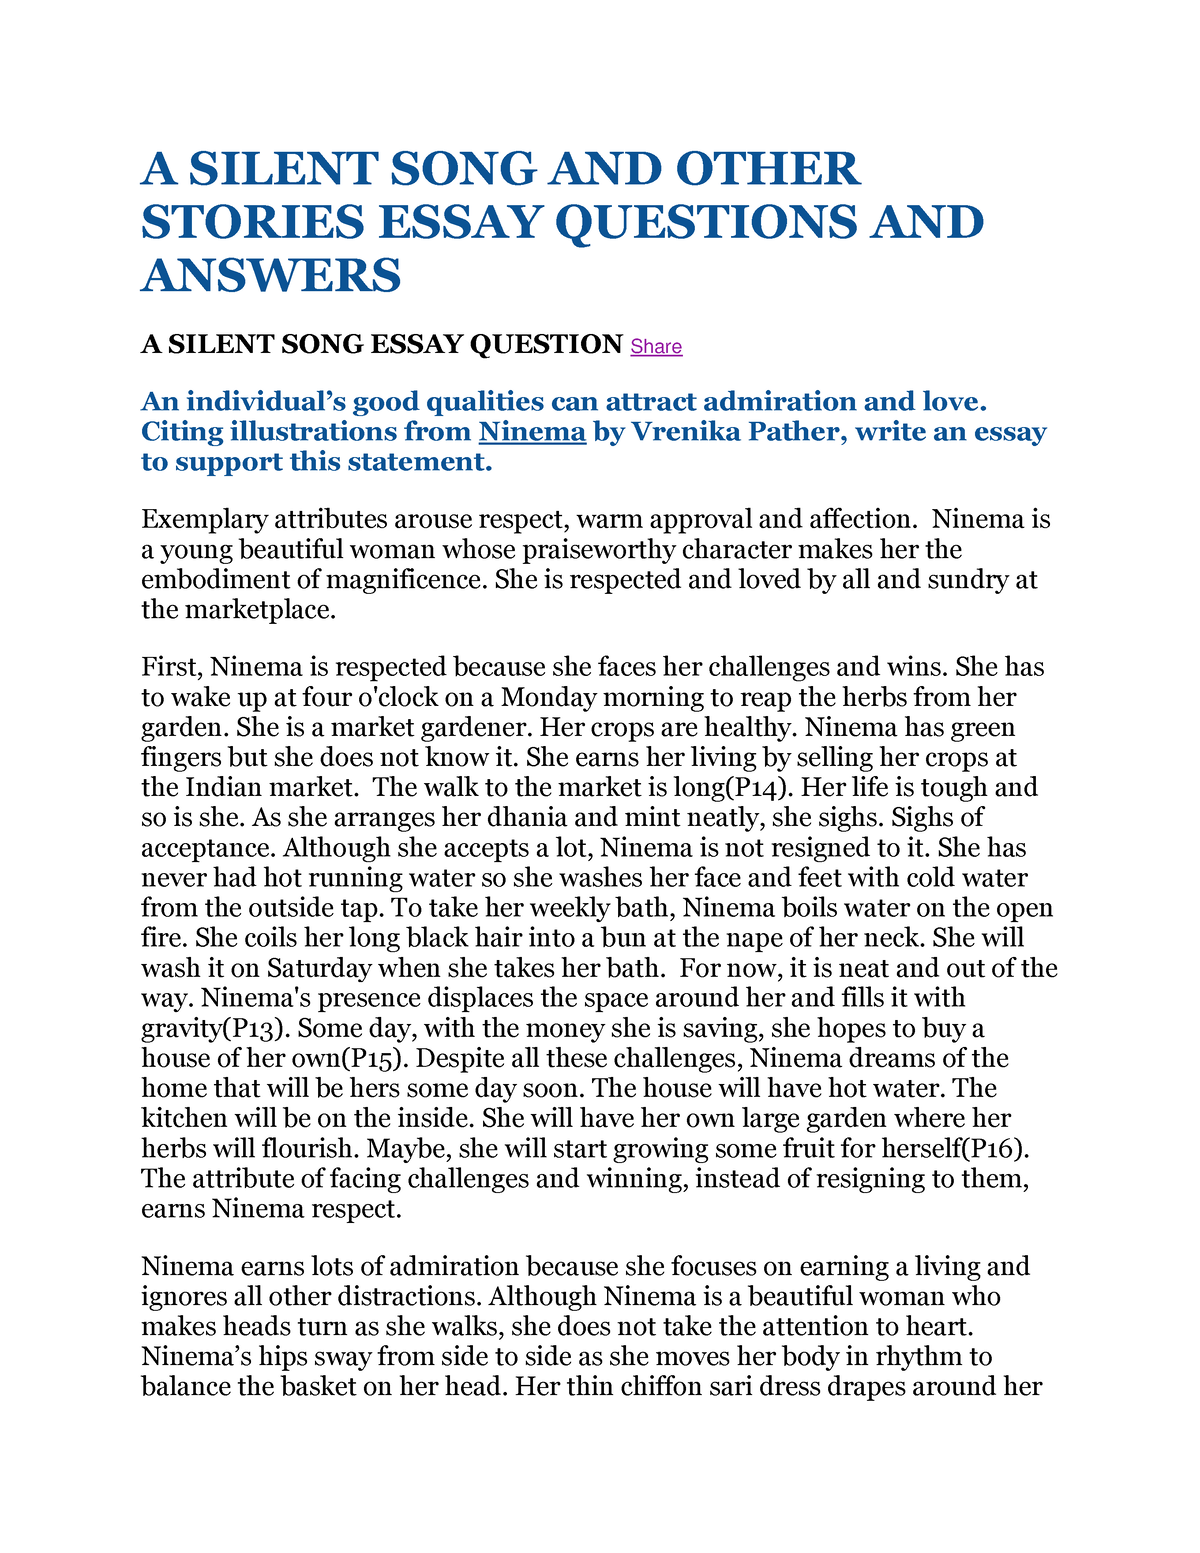 essay questions on silent song and other stories